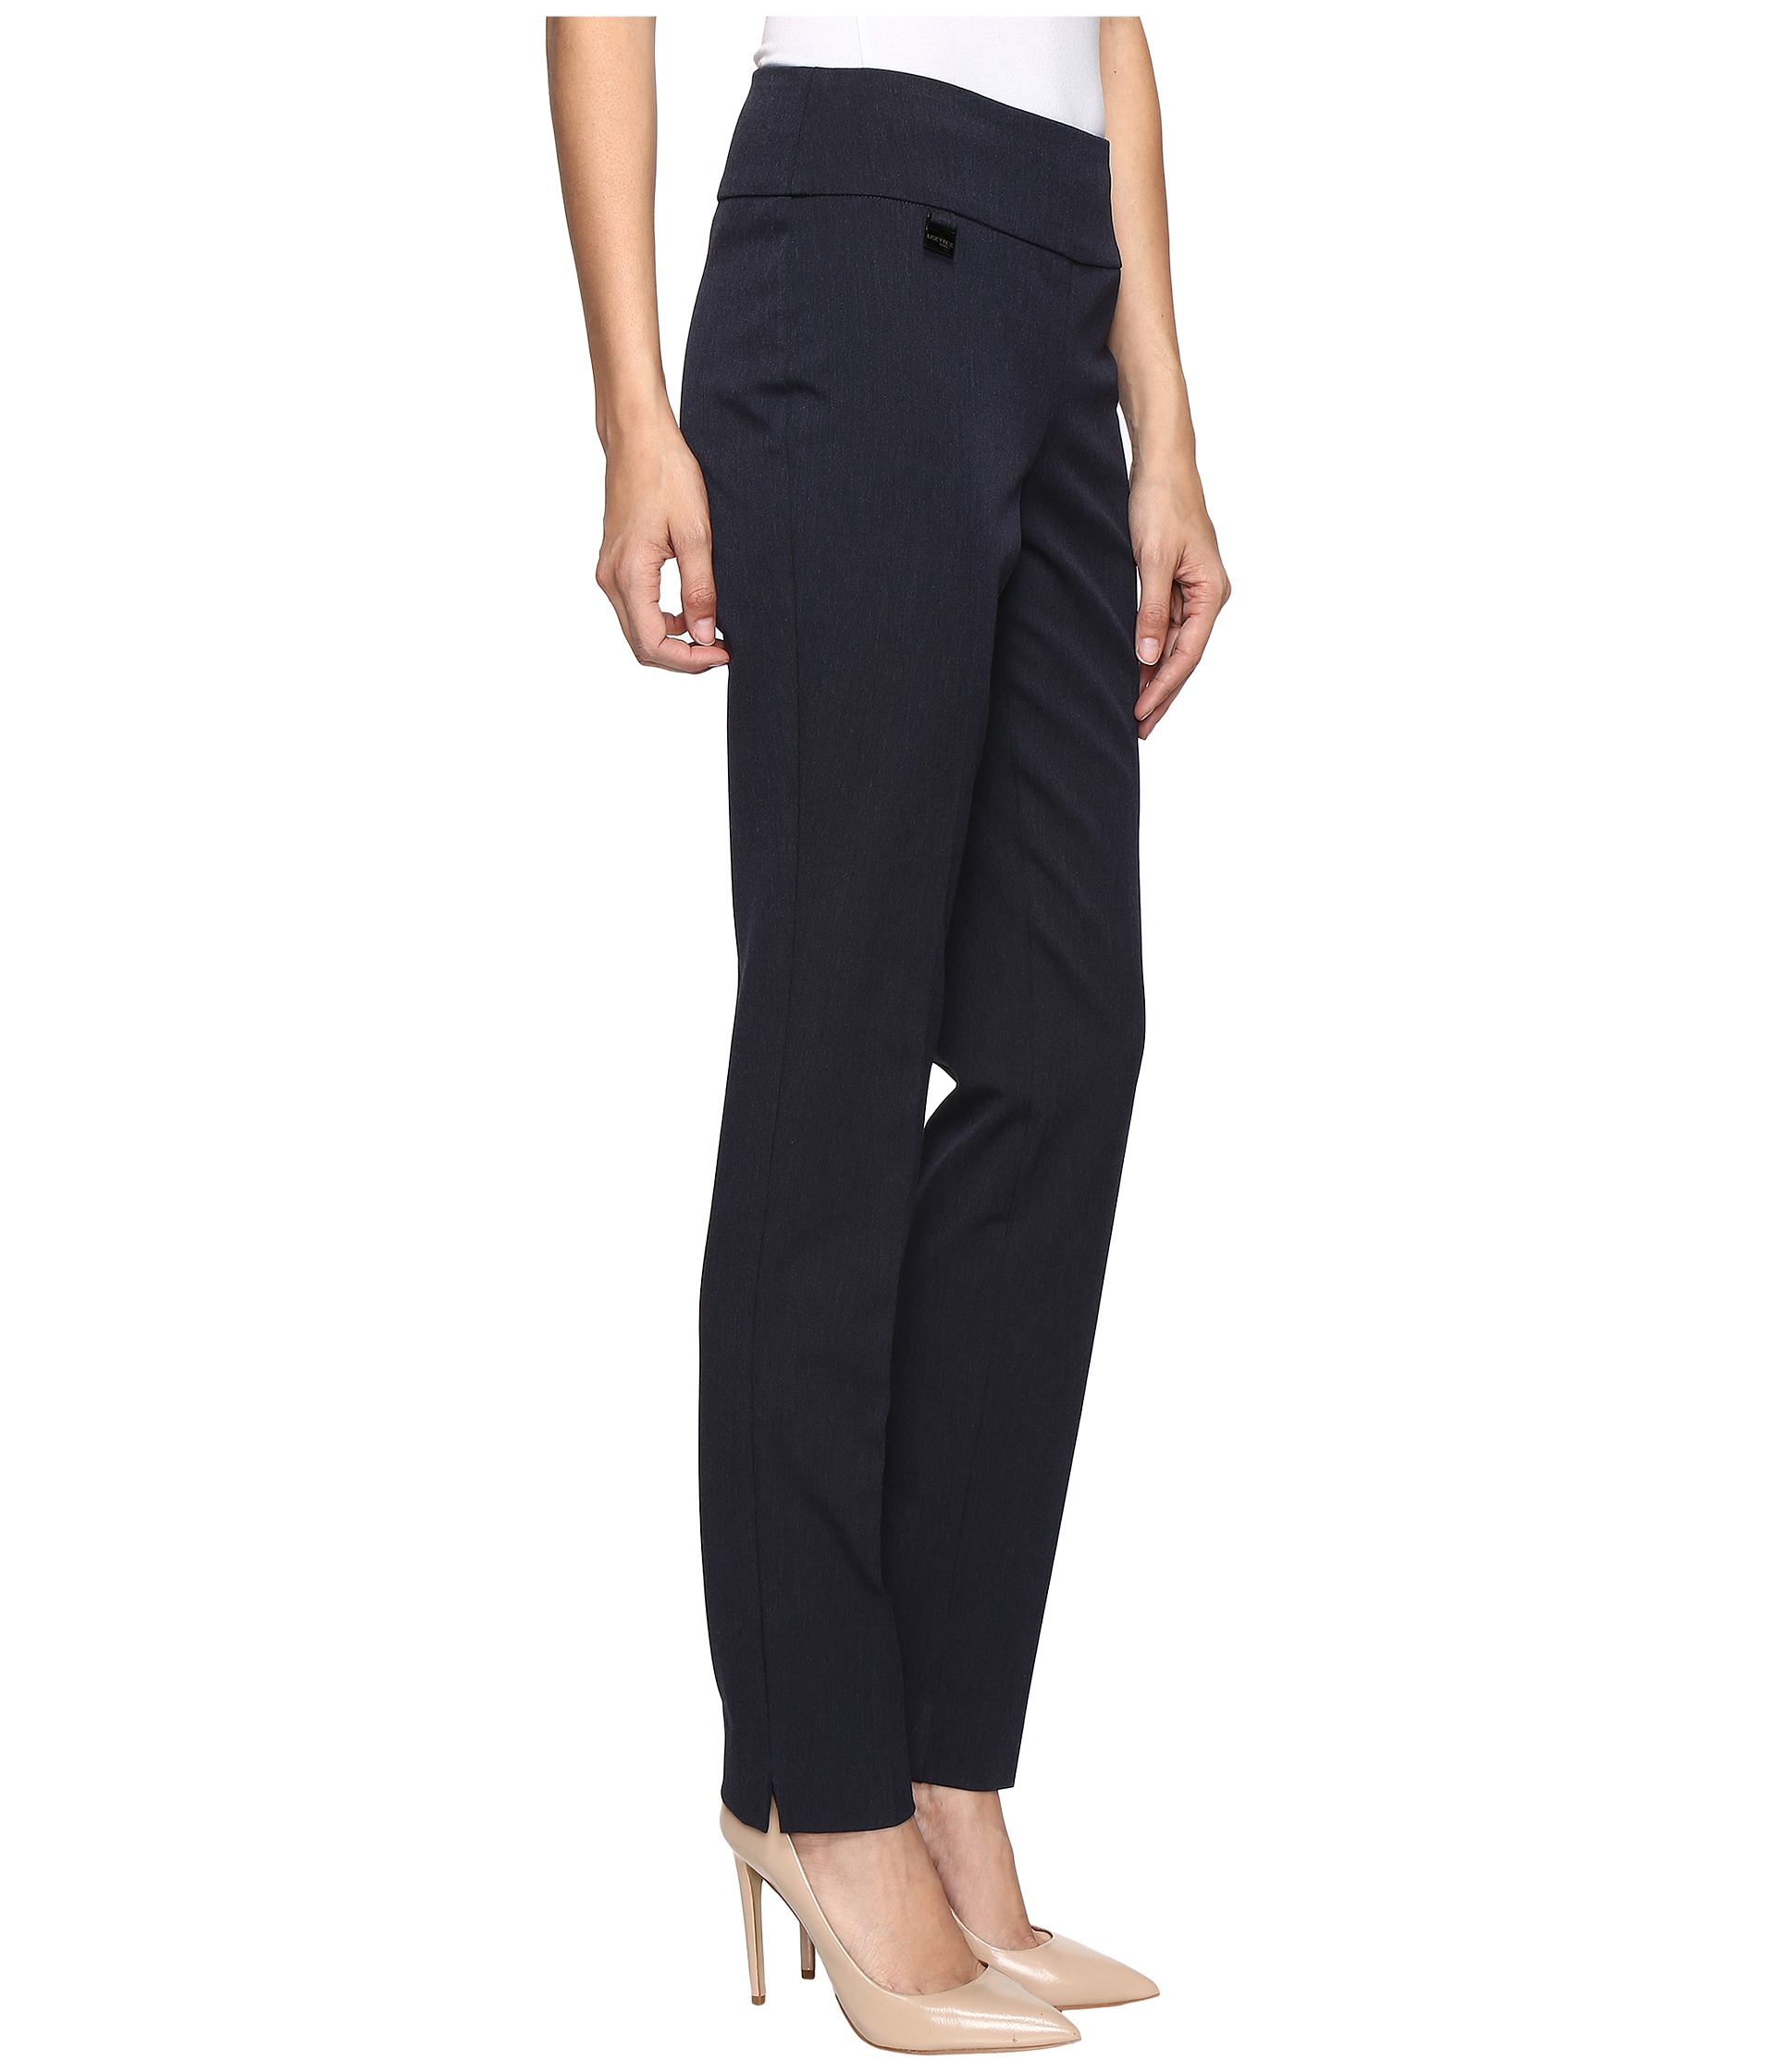 Lisette L Montreal Gaby Stretch Fabric Slim Pants at Zappos.com